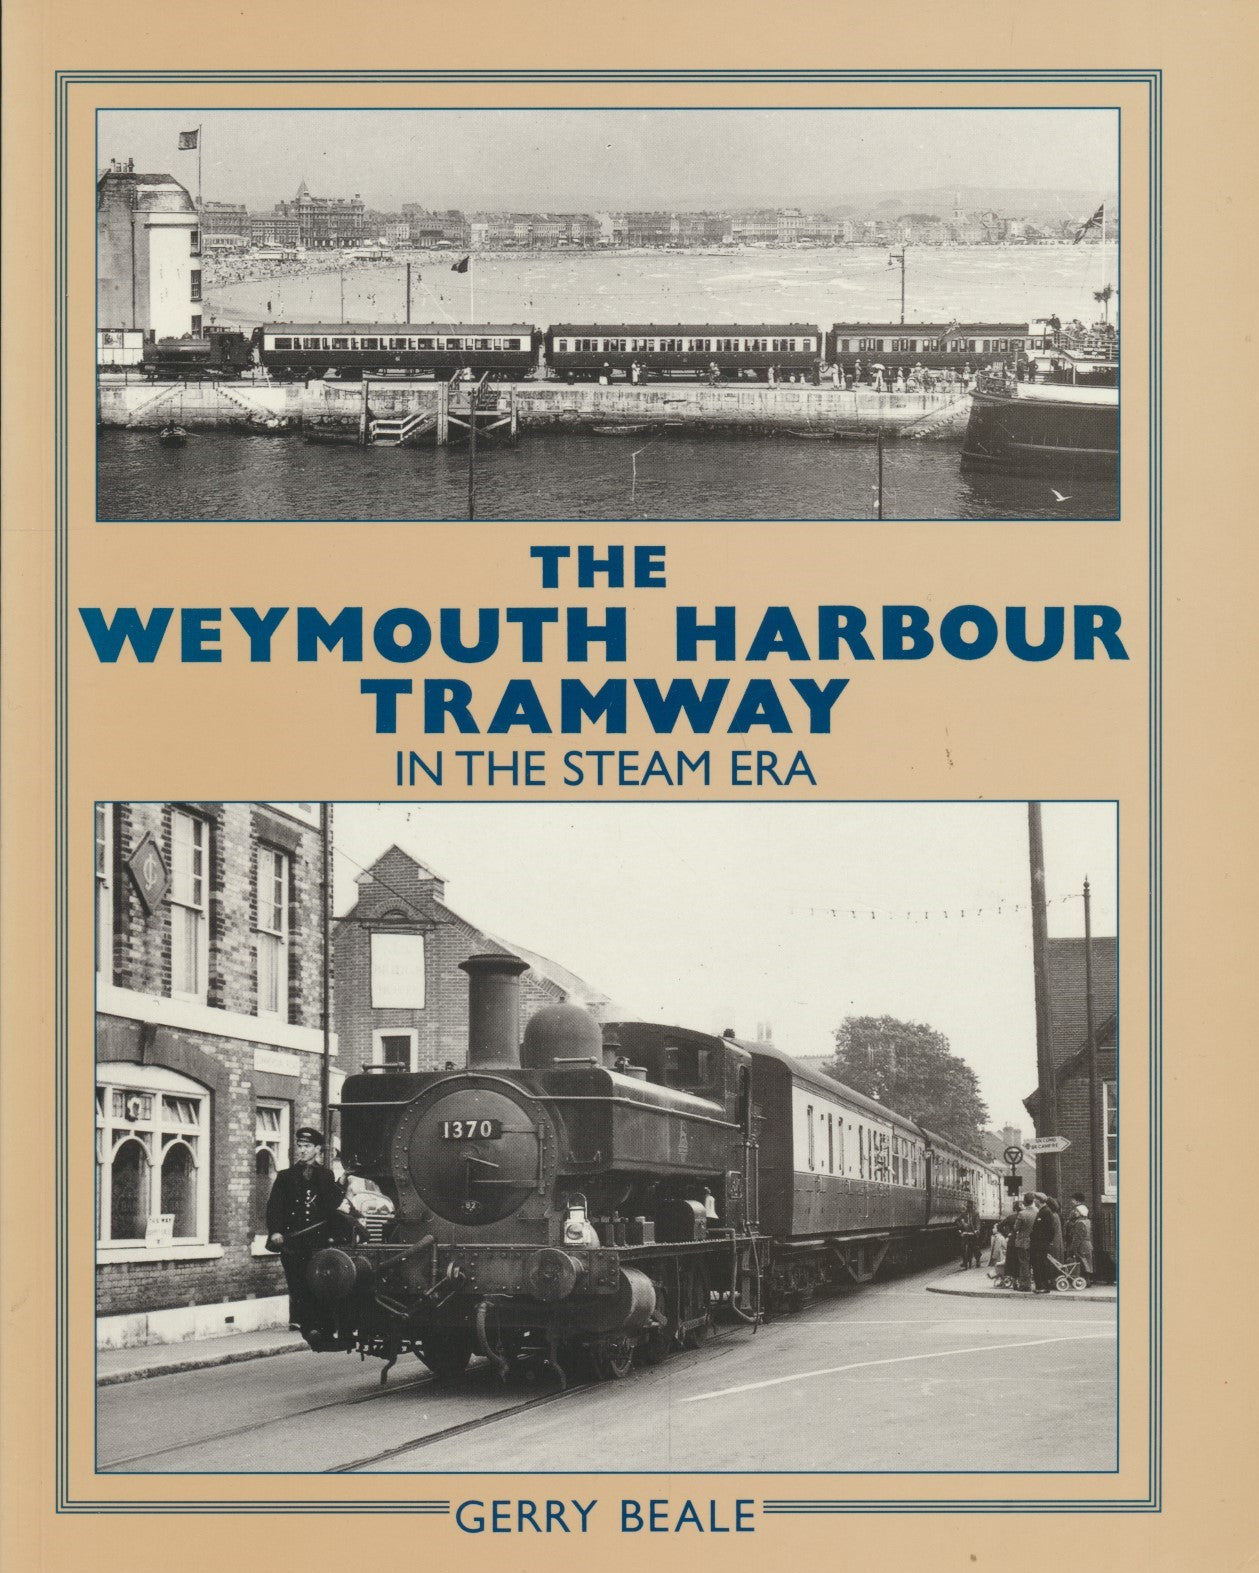 The Weymouth Harbour Tramway in the Steam Era